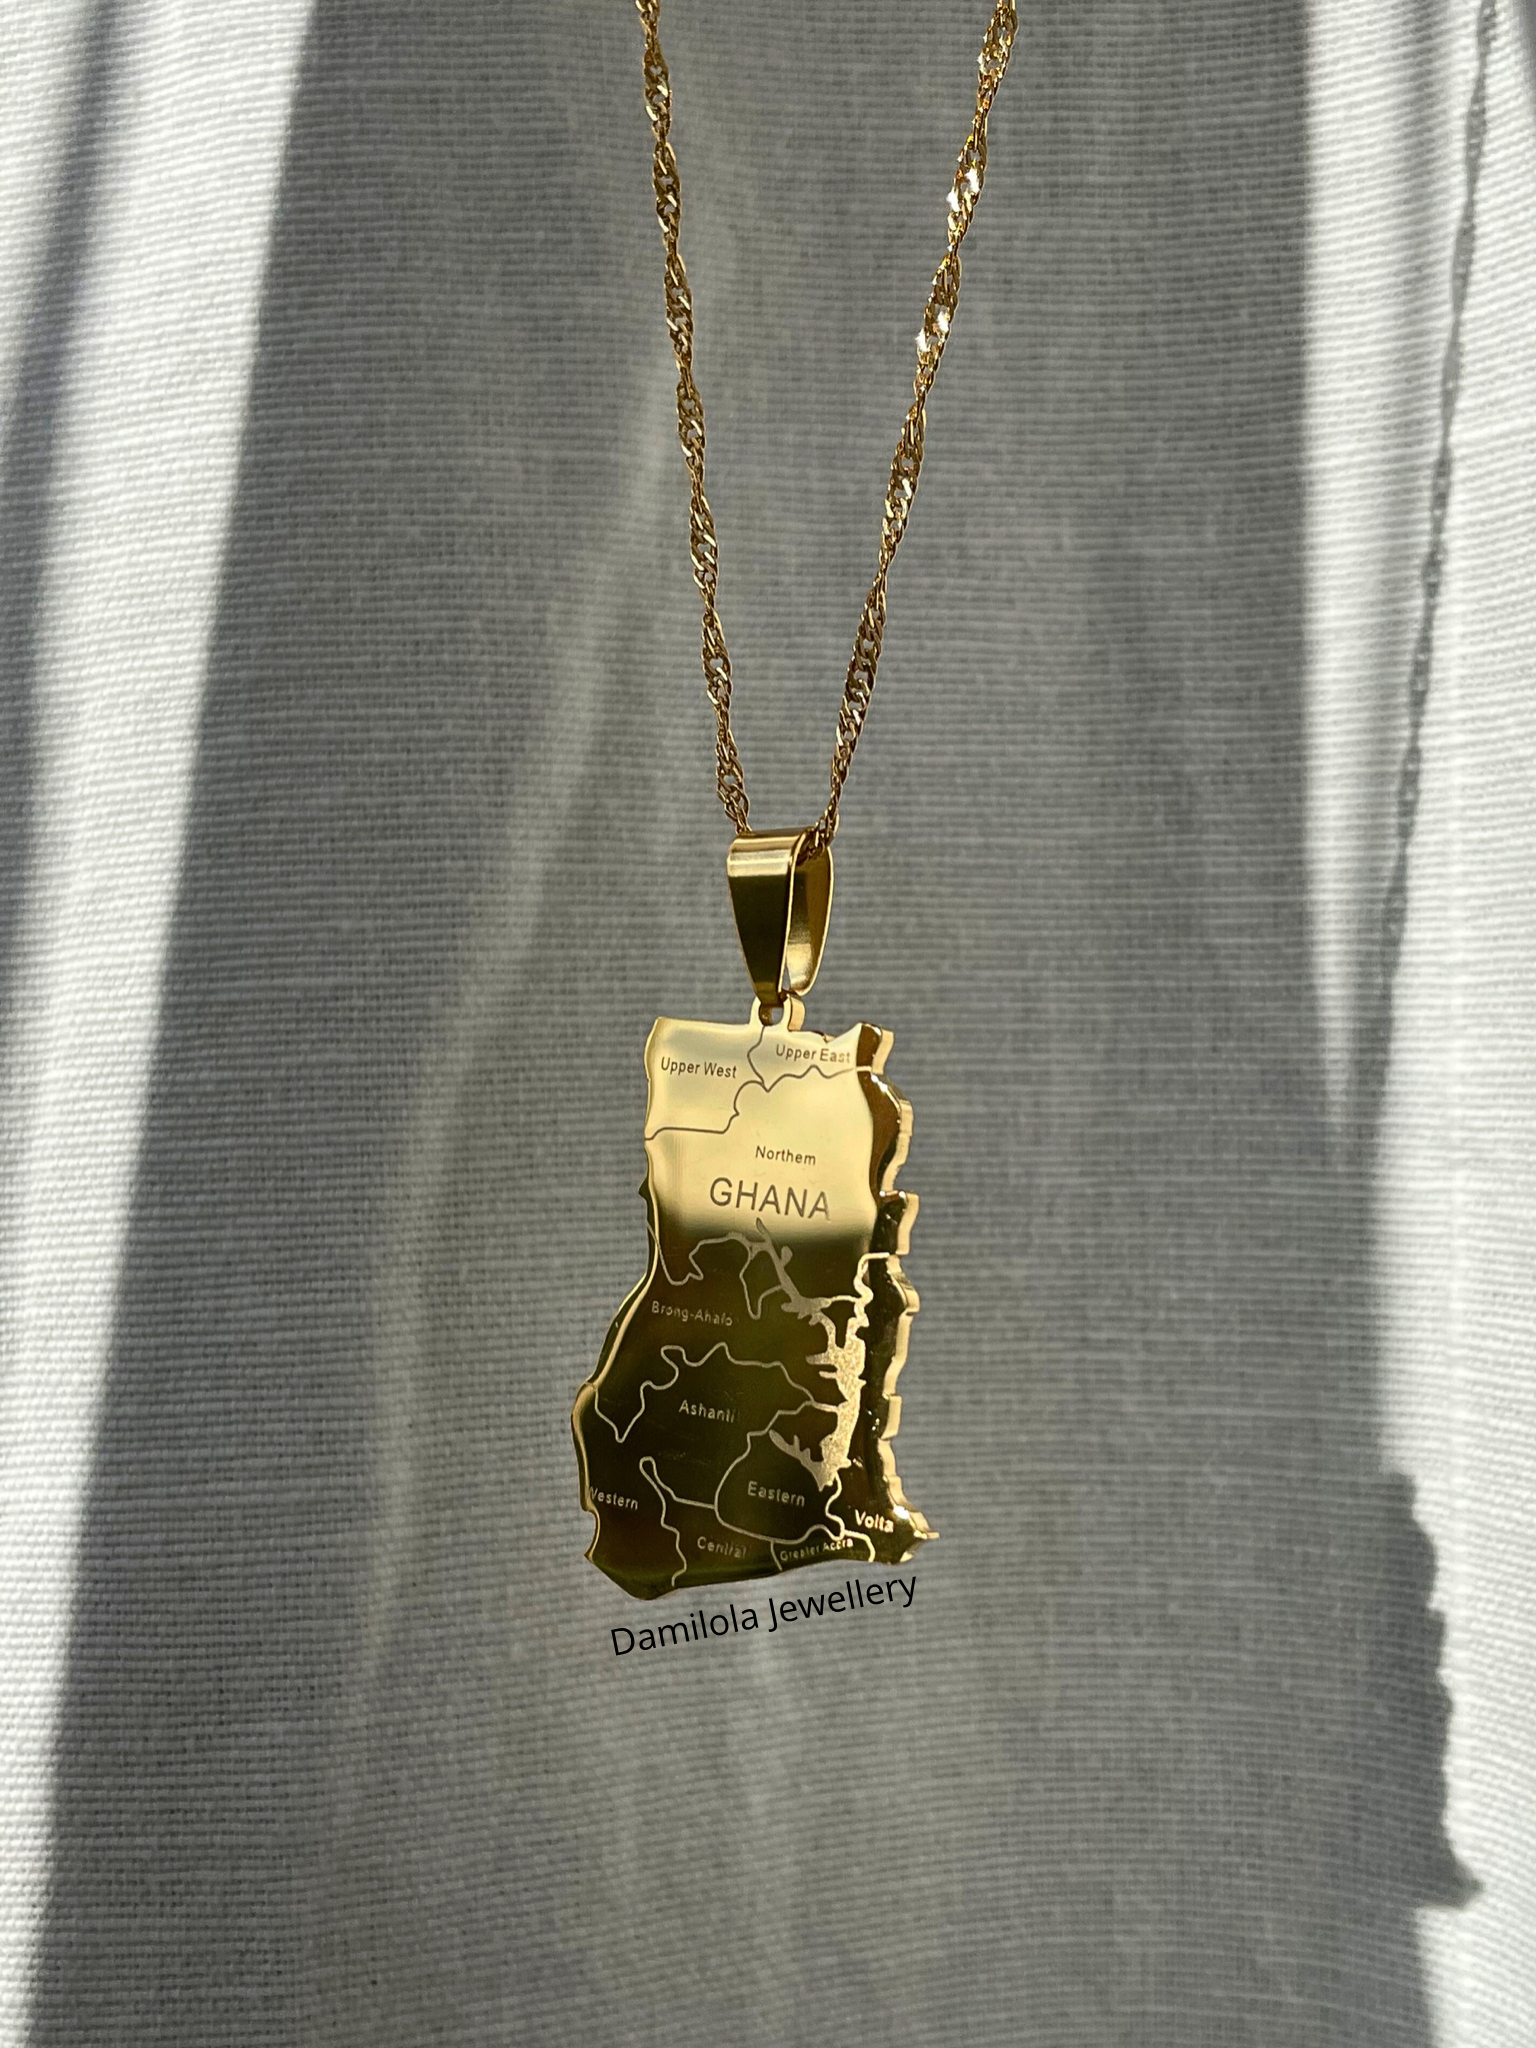 Ghana Engraved Map Necklace - Gold/Silver 🇬🇭 'Freedom and Justice'